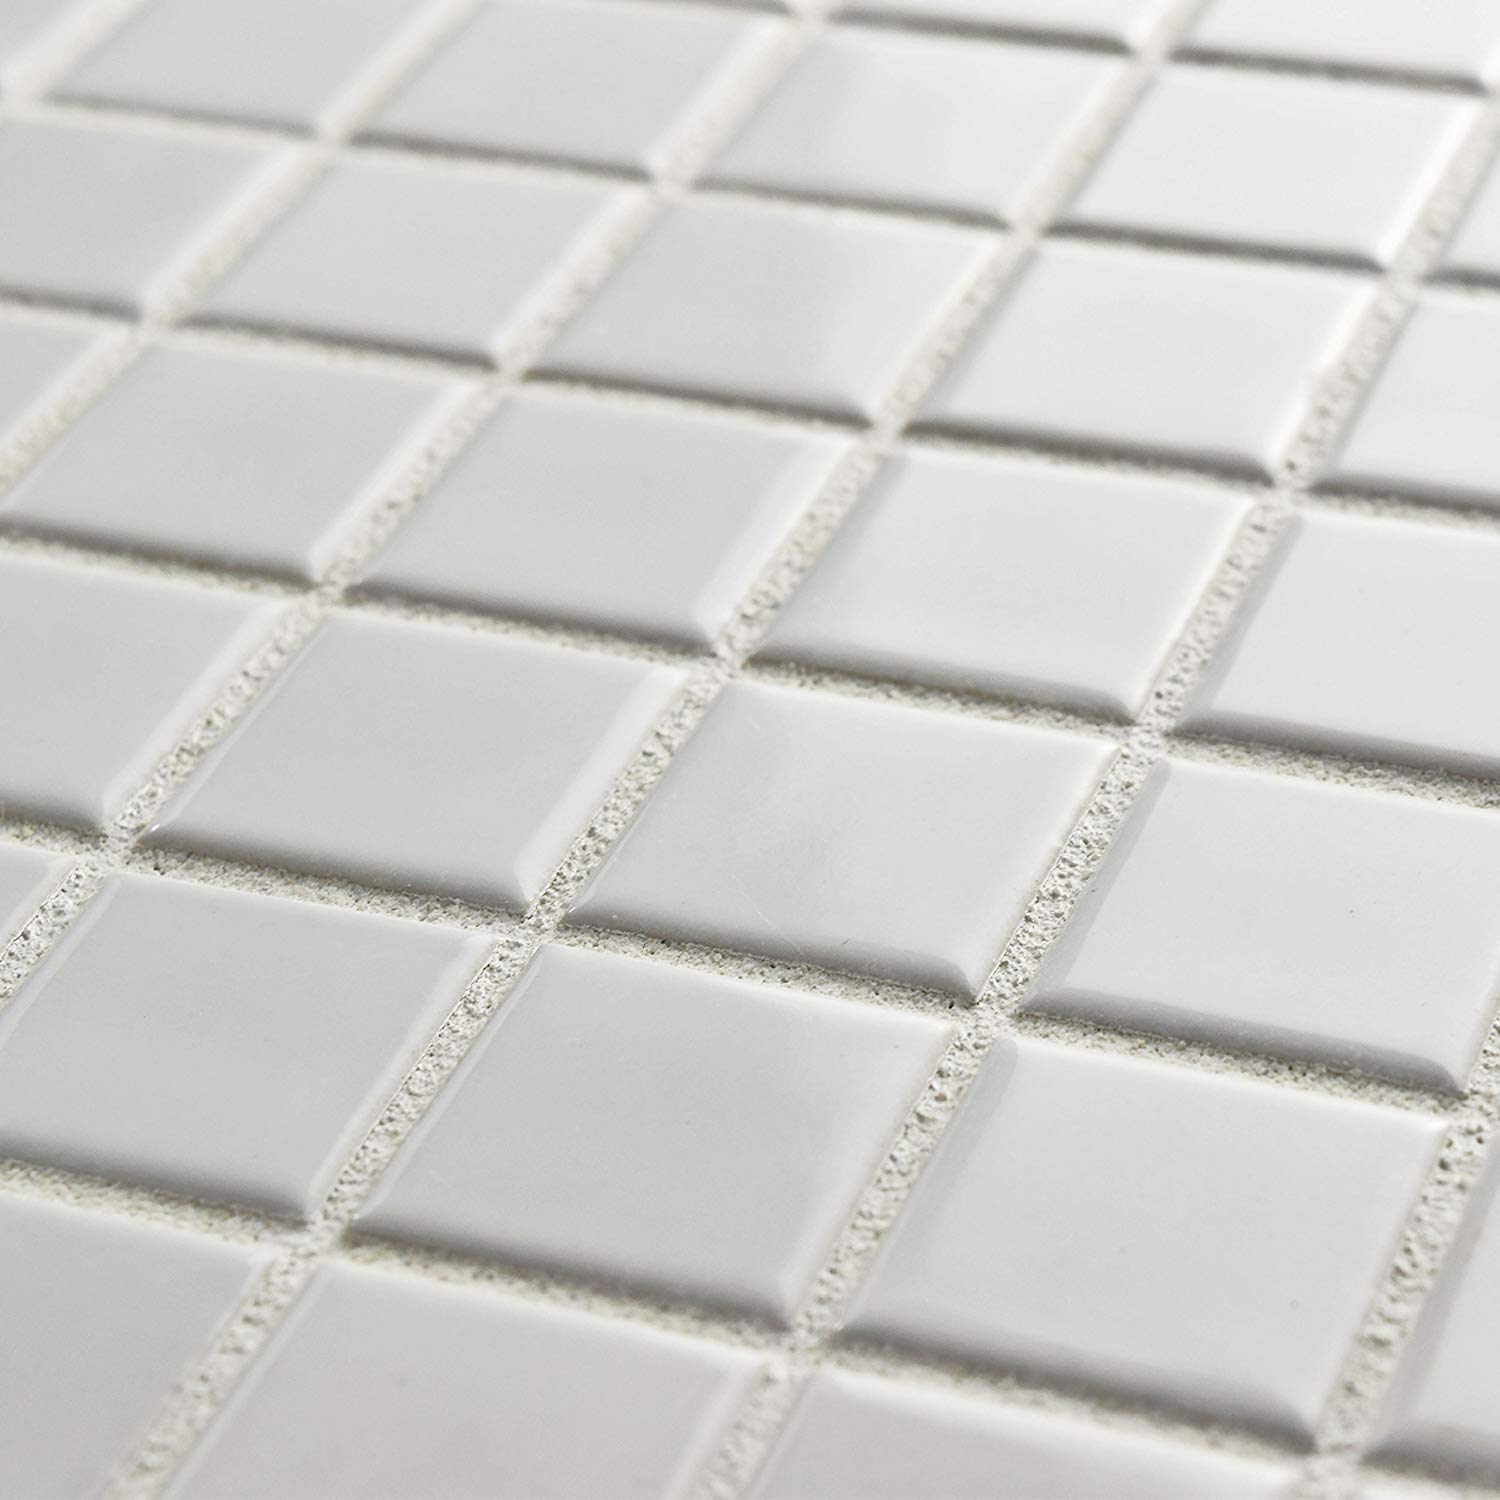 Square 1"White Matte Porcelain Floor and Wall Tile